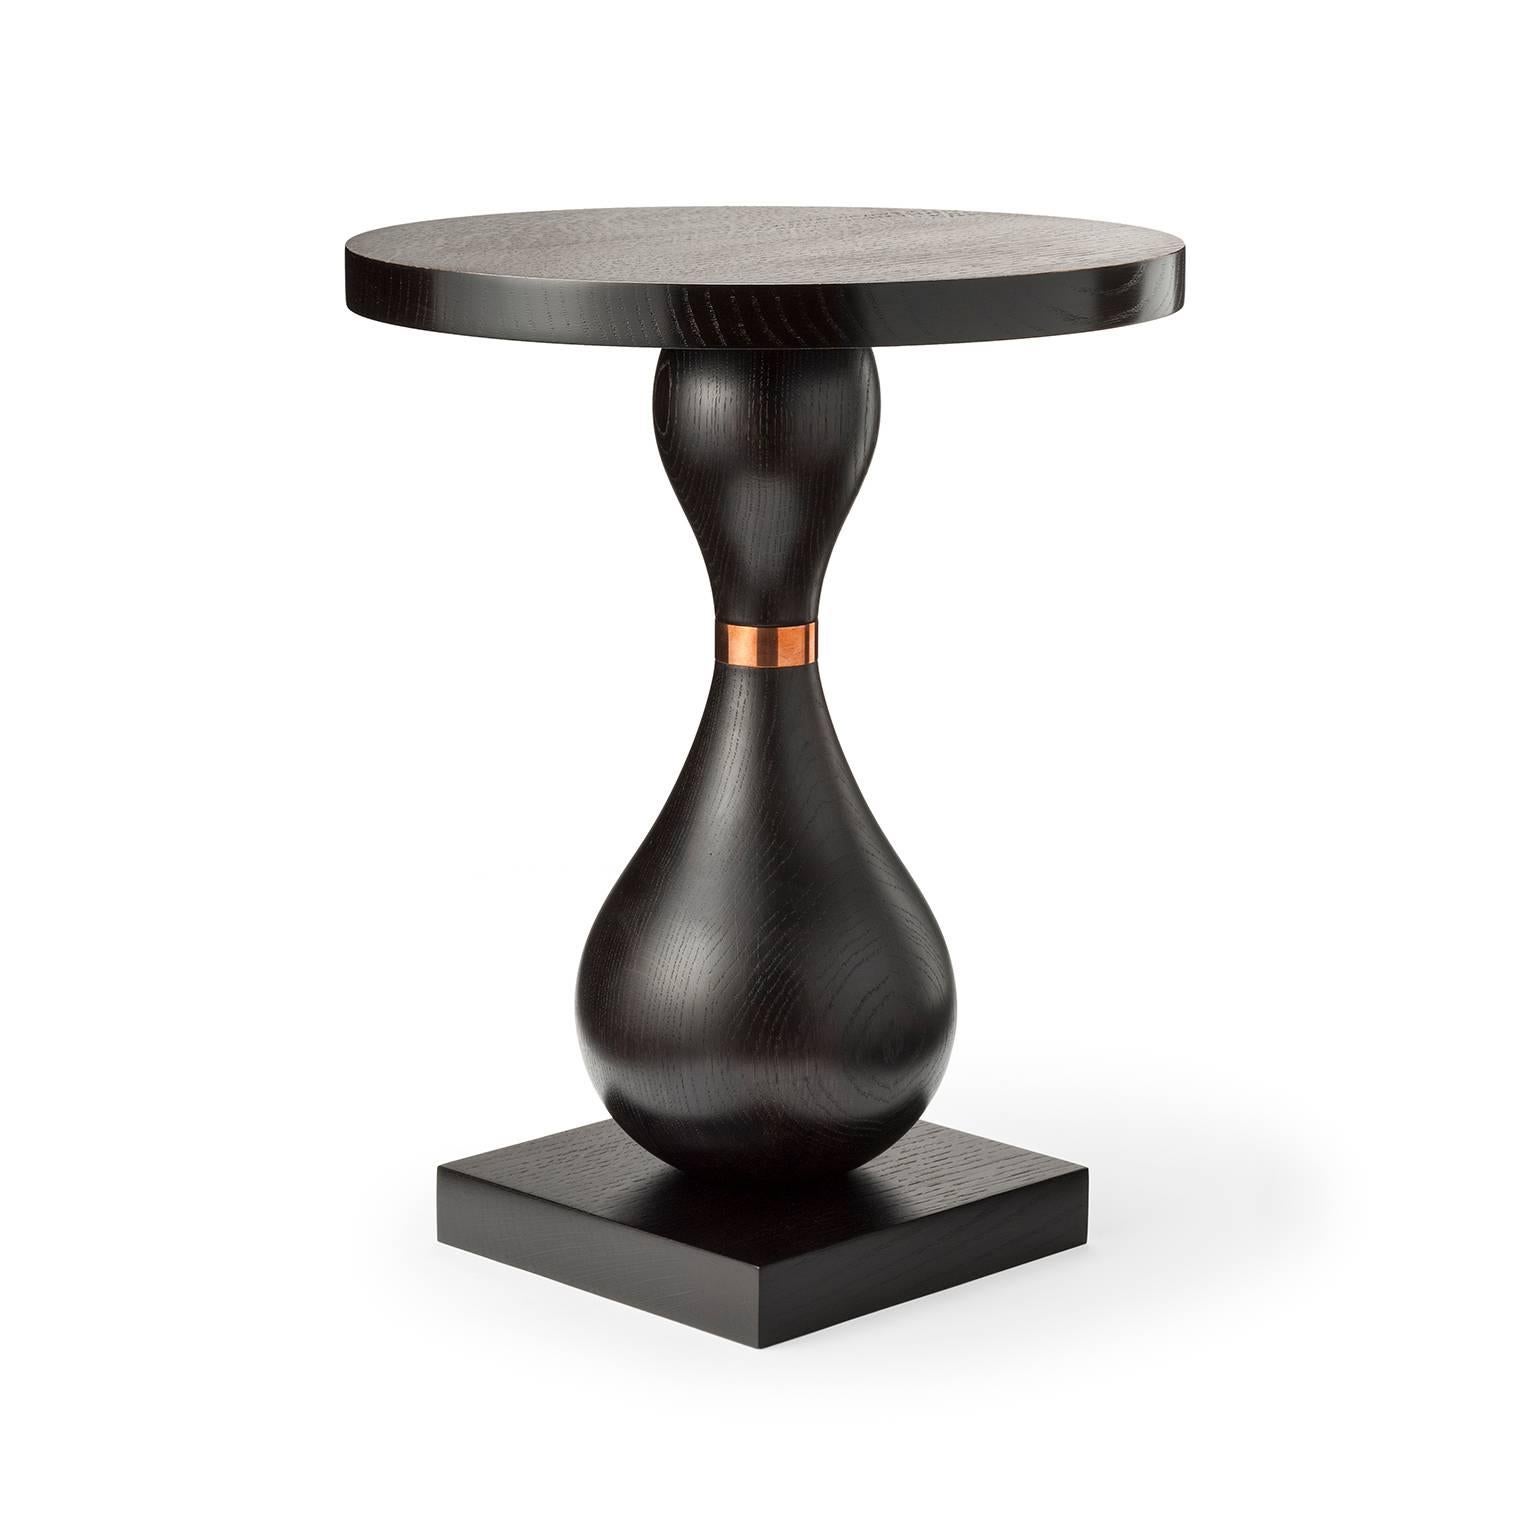 Possessing a beautifully curvaceous shape accentuated by the use of a dark ebonized finish and punctuated by its copper detail, this unique occasional table would complement any of our upholstered pieces. The King Pin occasional table is shown here